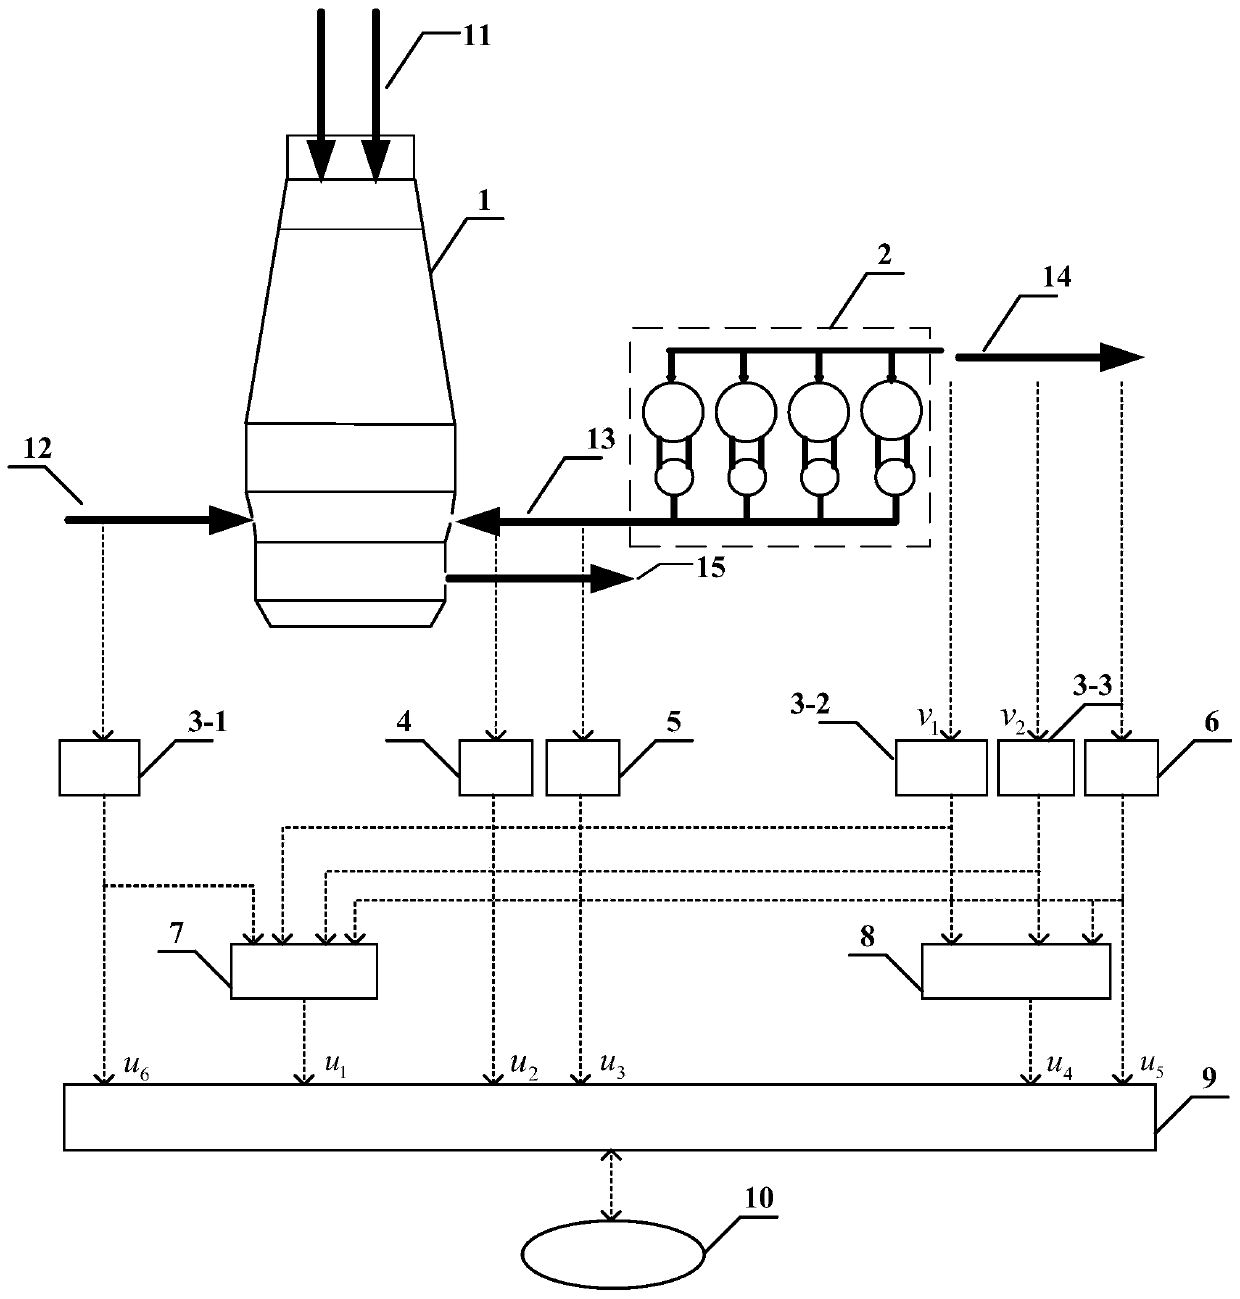 Blast furnace molten iron quality predicting system based on ensemble learning and method